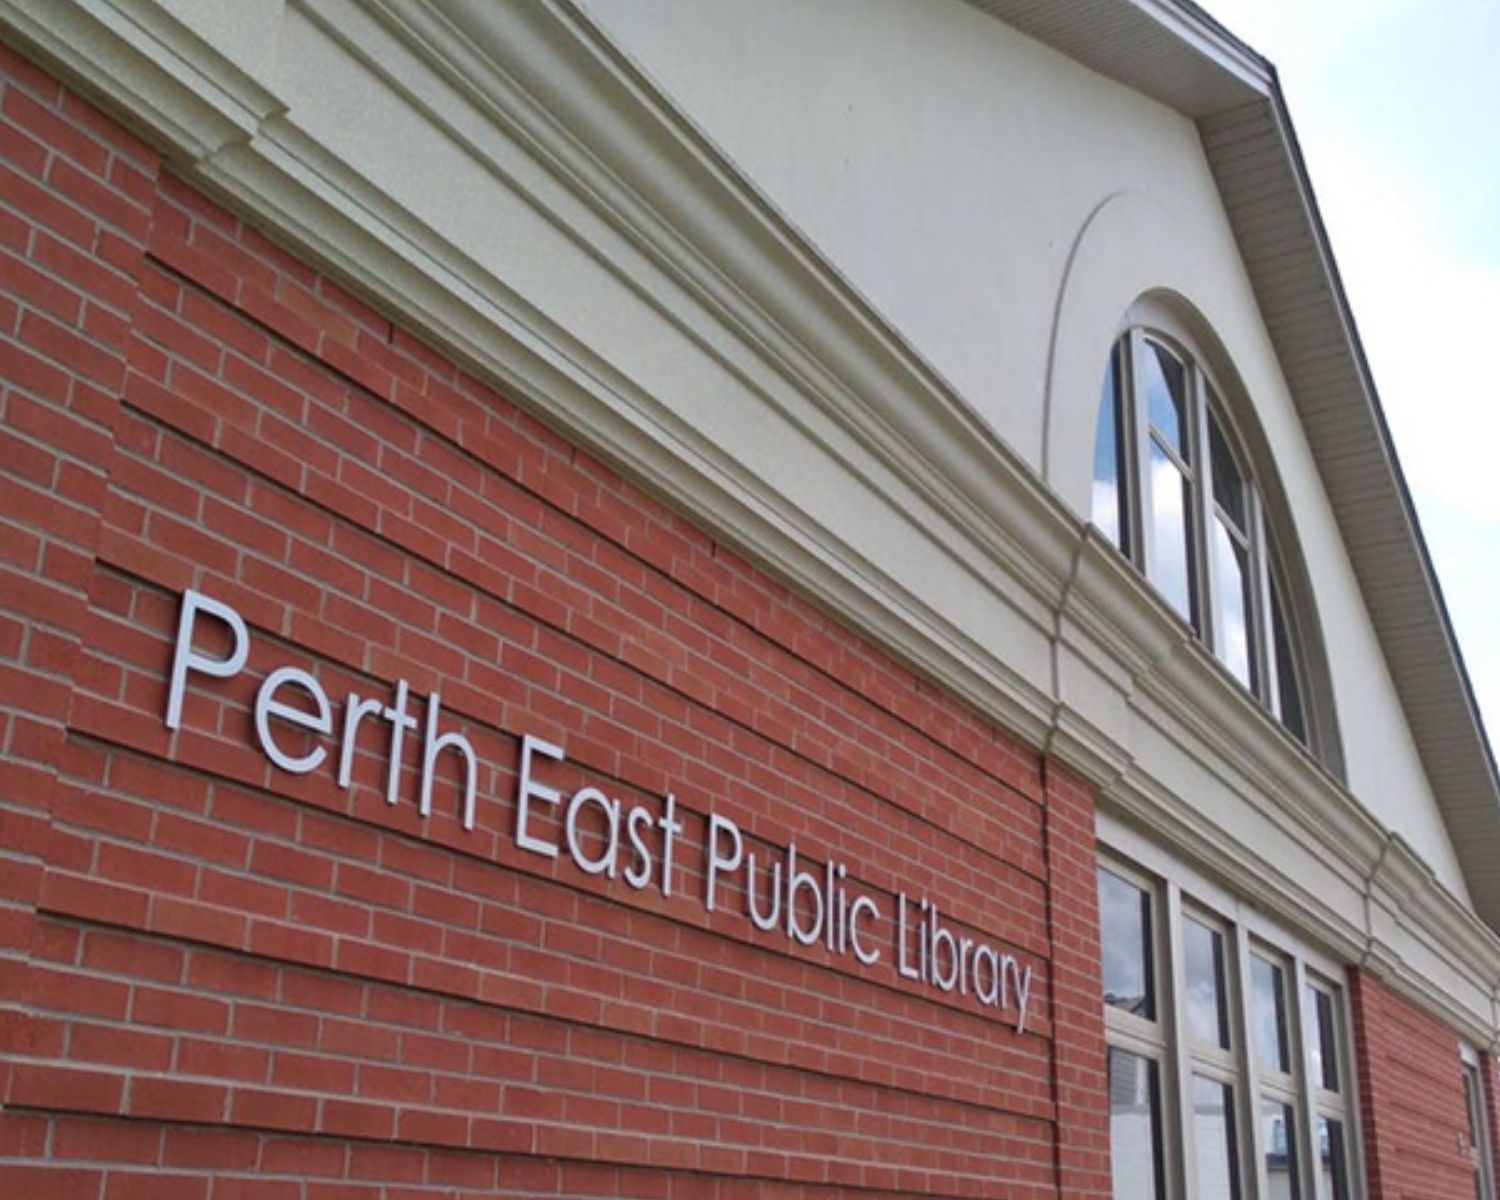 Image of the exterior PEPL building: a red brick building with the words "Perth East Public Library" 